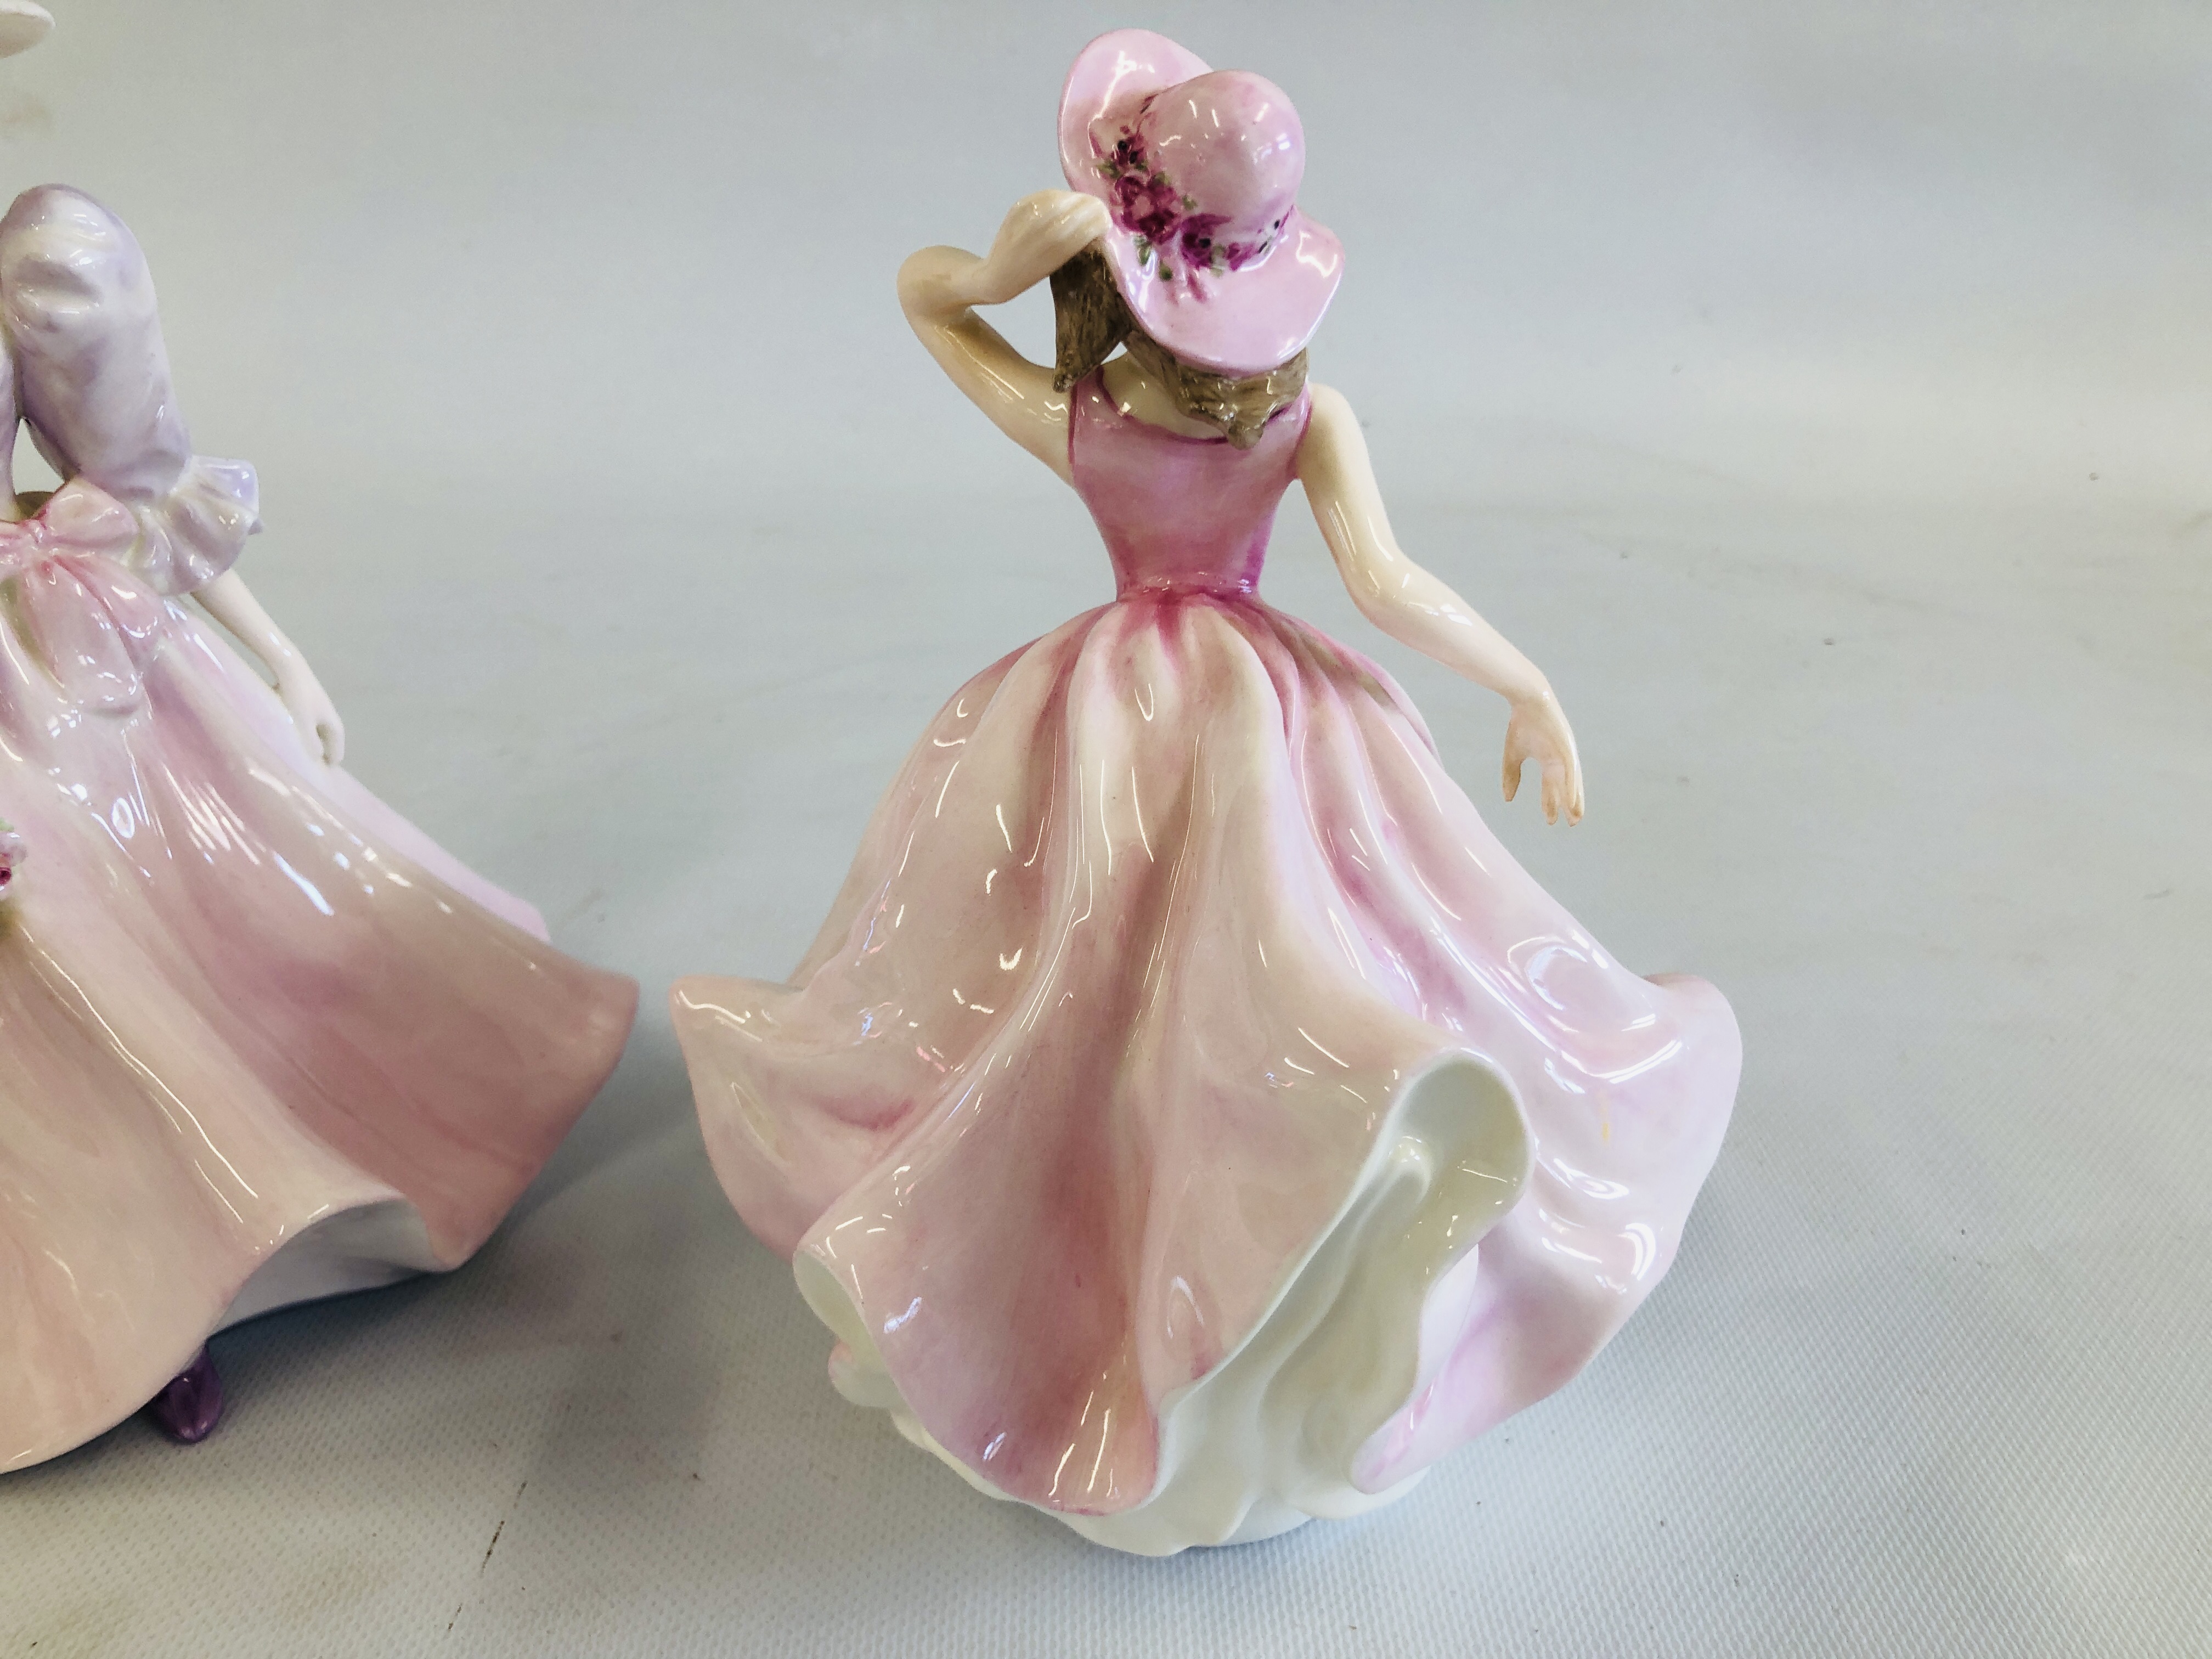 TWO COALPORT LADIES OF FASHION CHINA CABINET FIGURES TO INCLUDE "BARBARA ANN" AND "MELODY" BY JOHN - Image 4 of 11